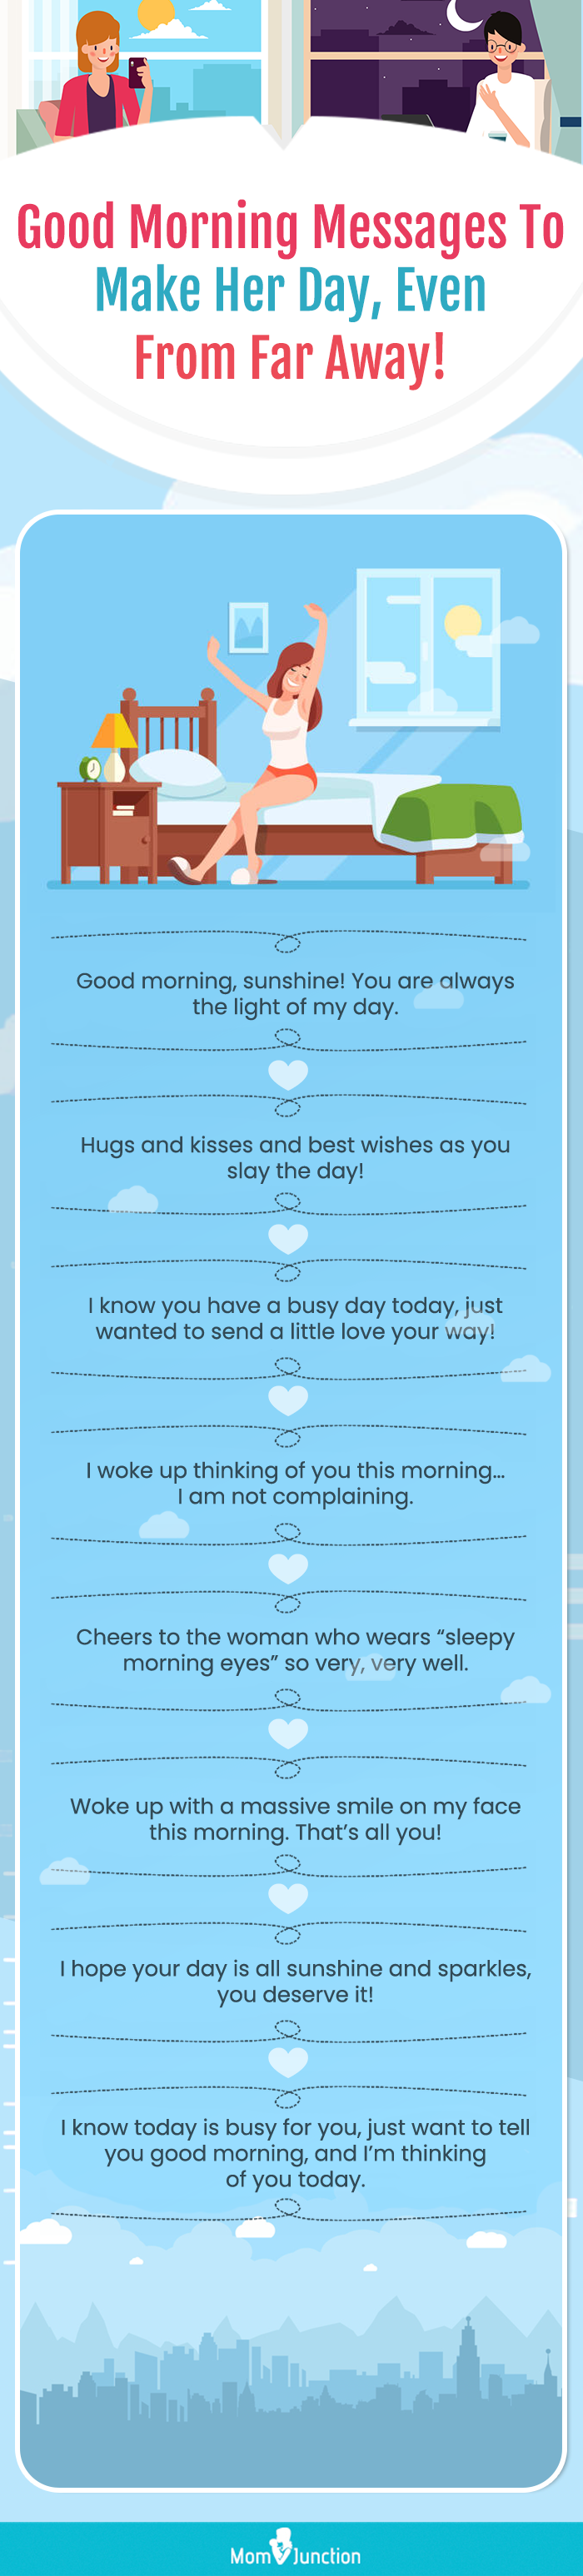 https://www.momjunction.com/wp-content/uploads/2022/10/good-morning-messages-to-make-her-day.png